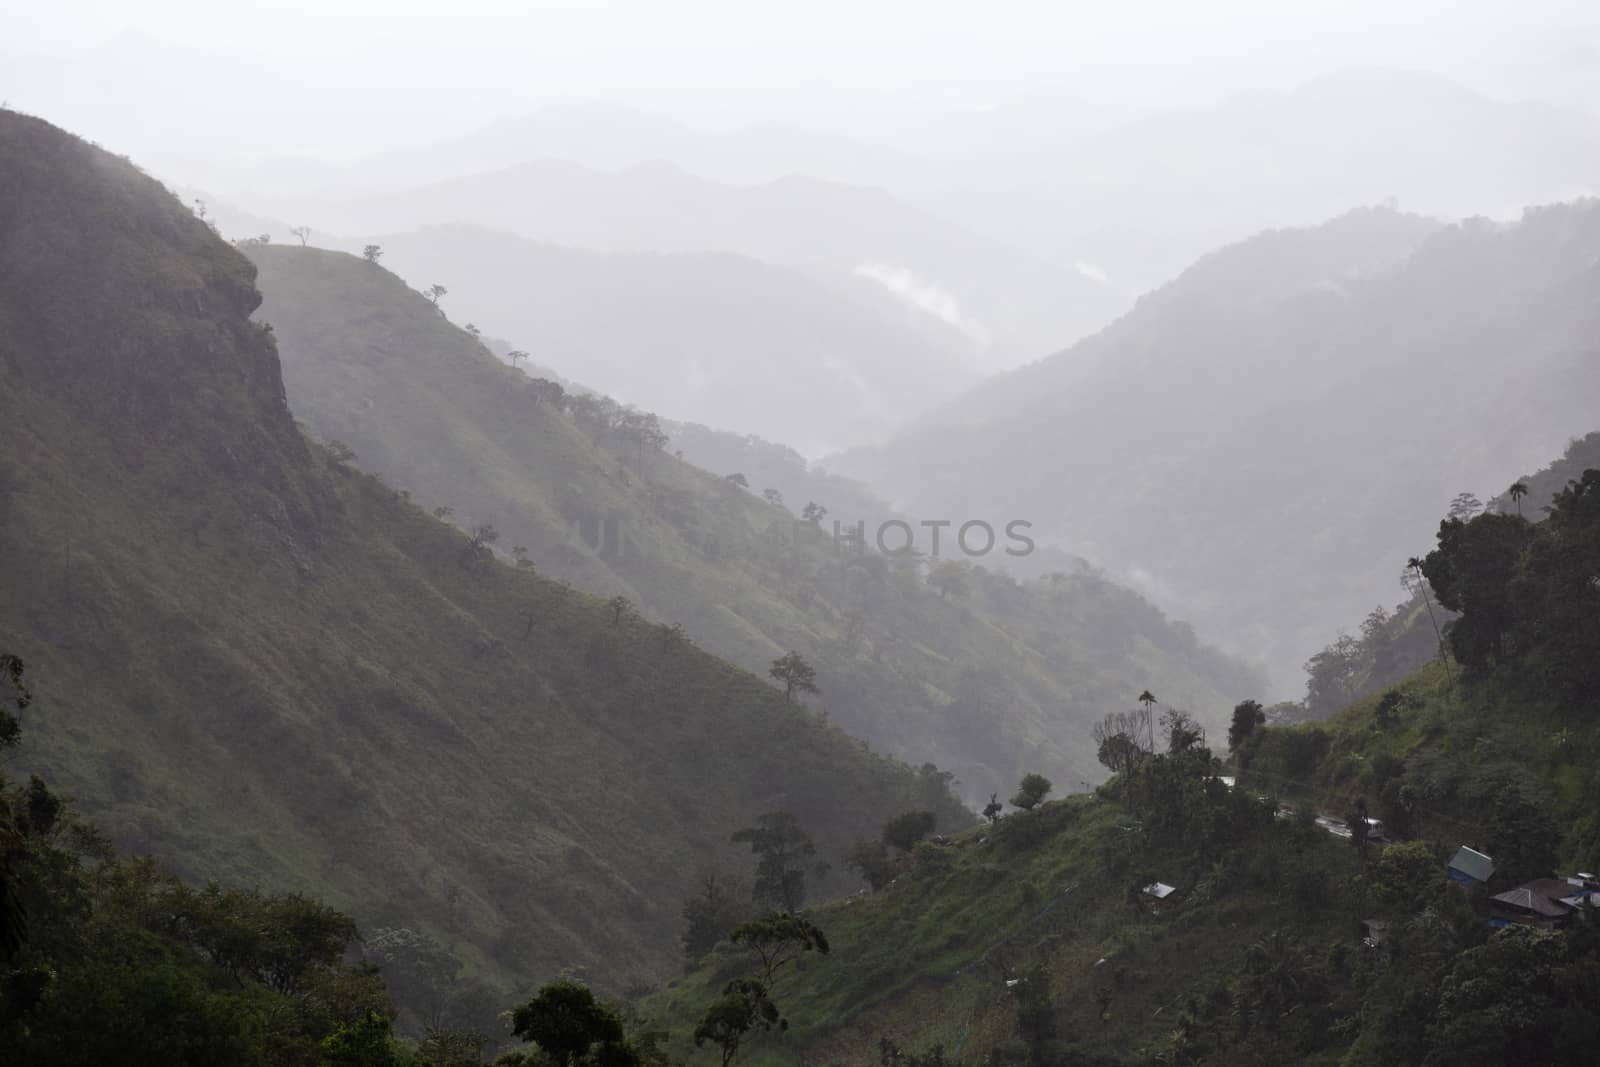 Ella Sri Lanka mountain gap landscape views across the wide valley to mountains in the distance misty early morning Adams Peak. High quality photo